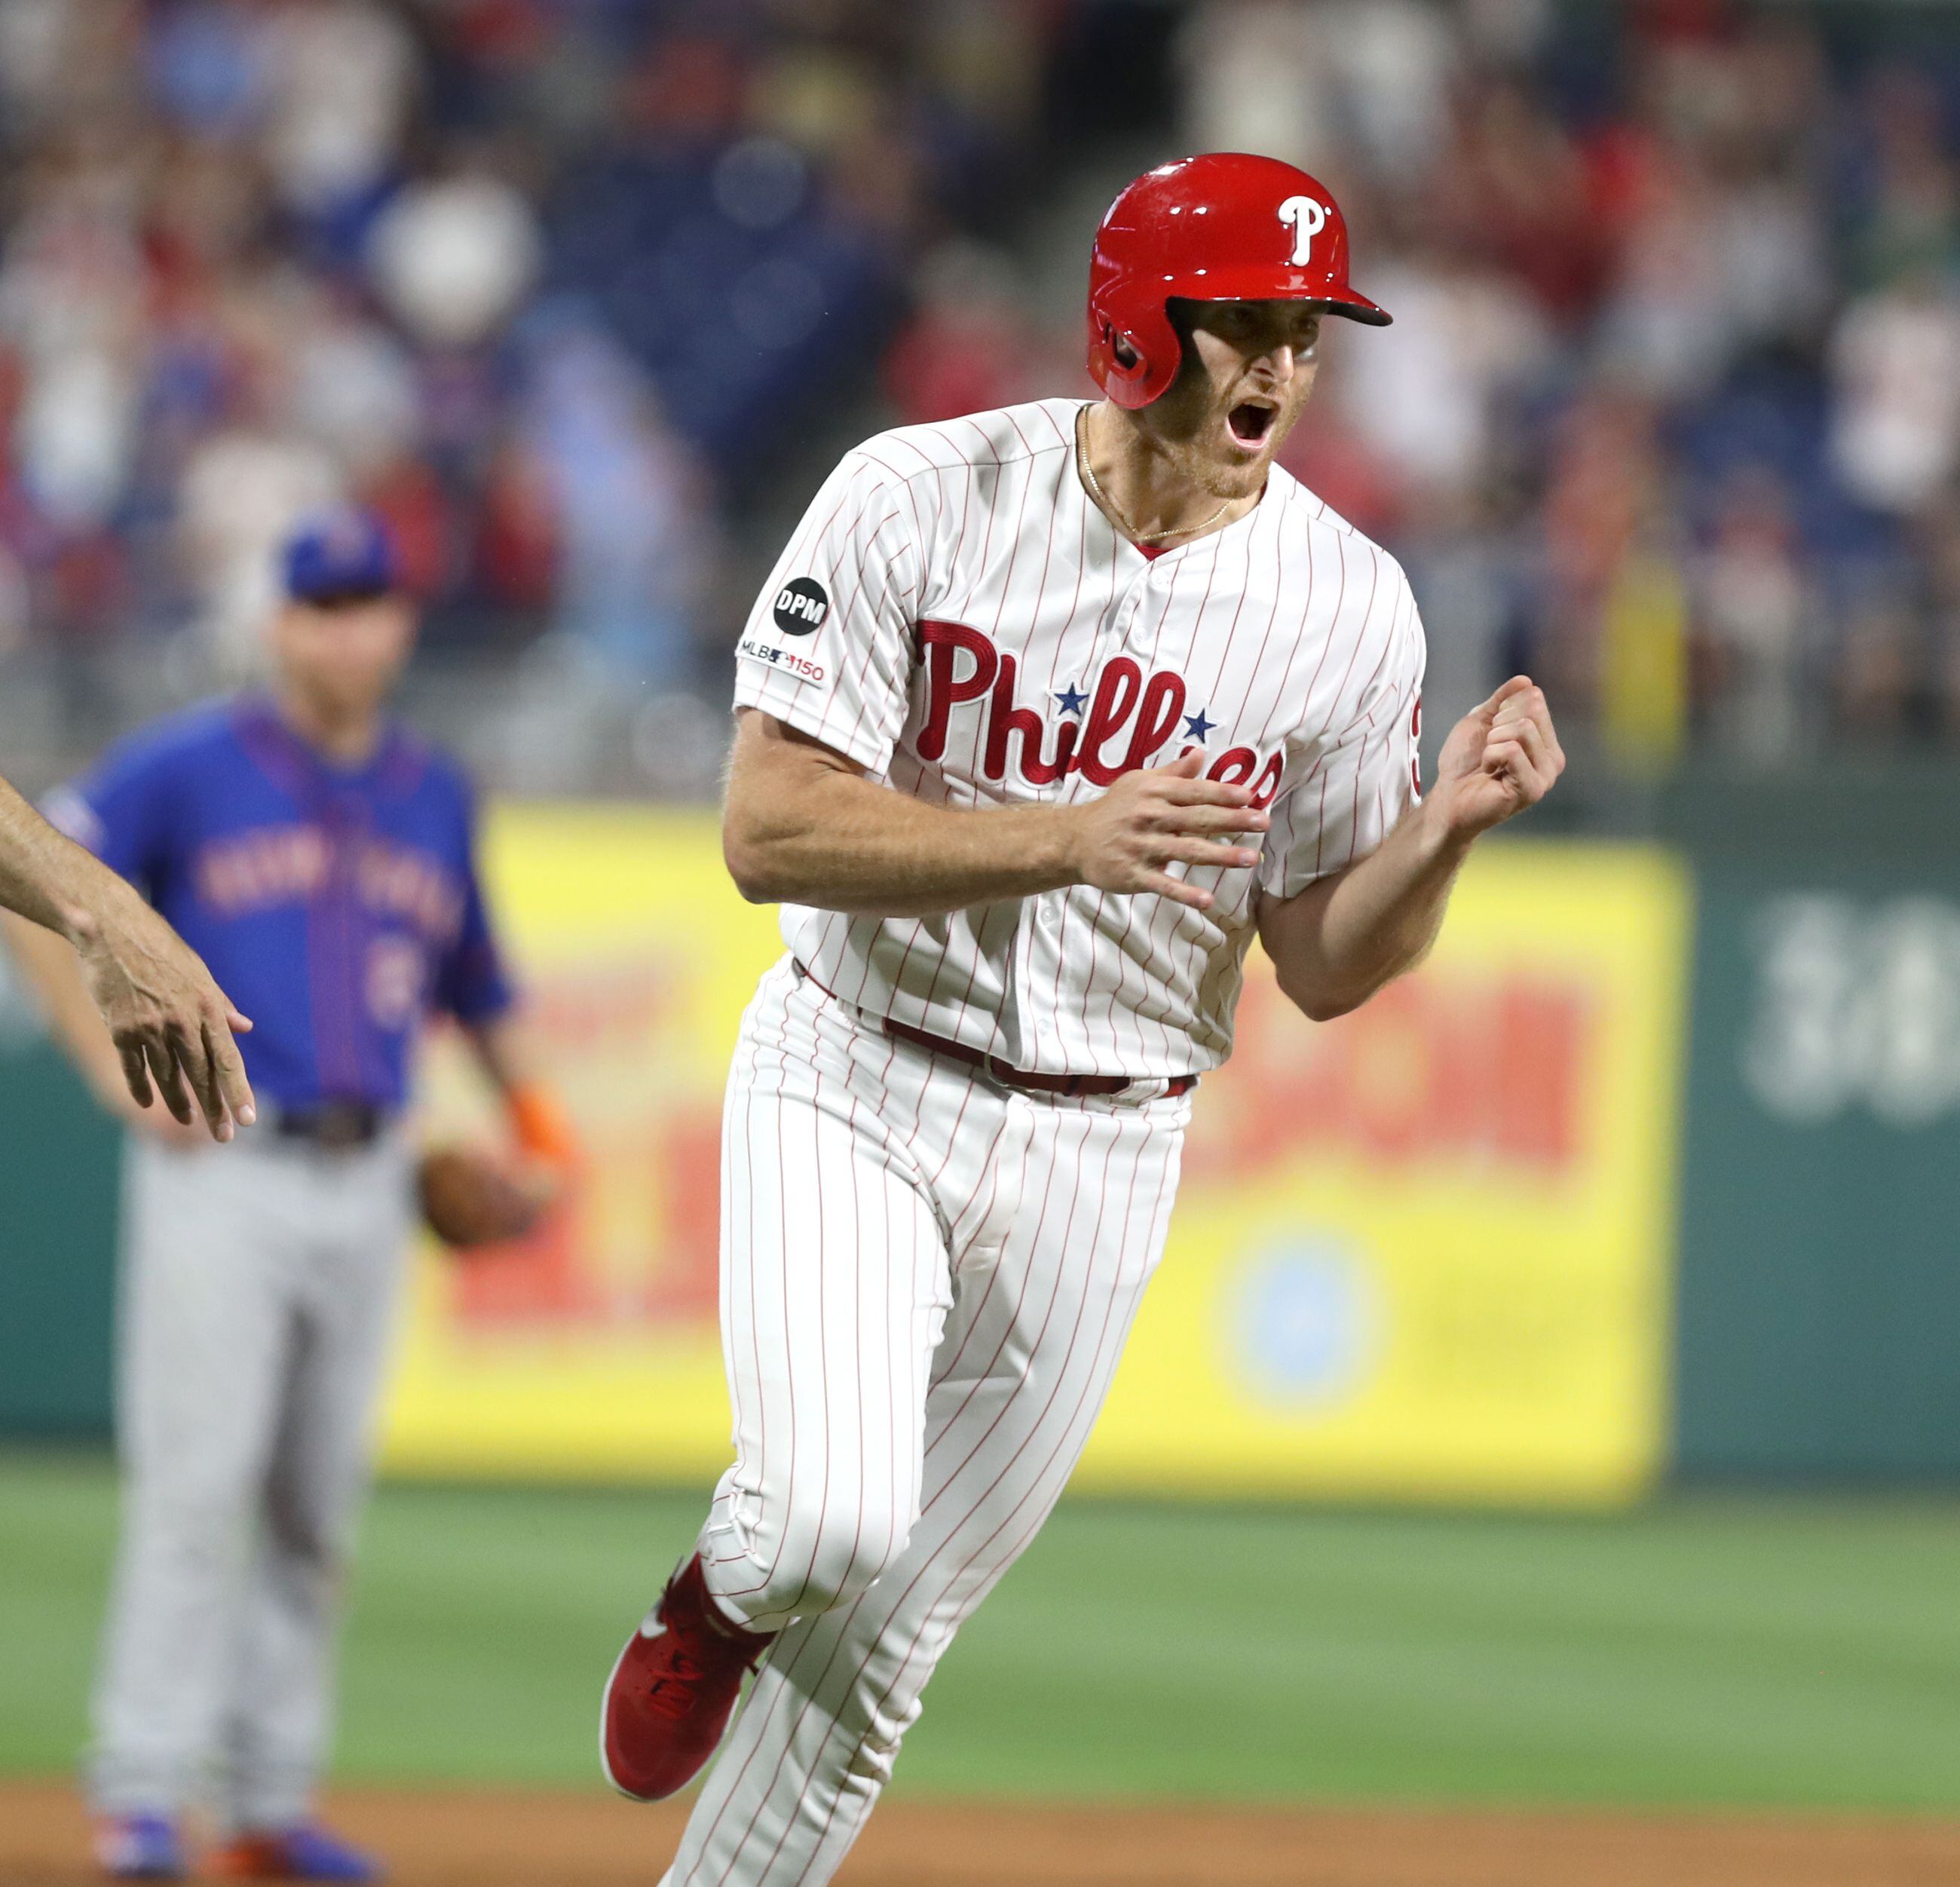 Phillies go all-in on Brad Miller's bamboo magic, giving